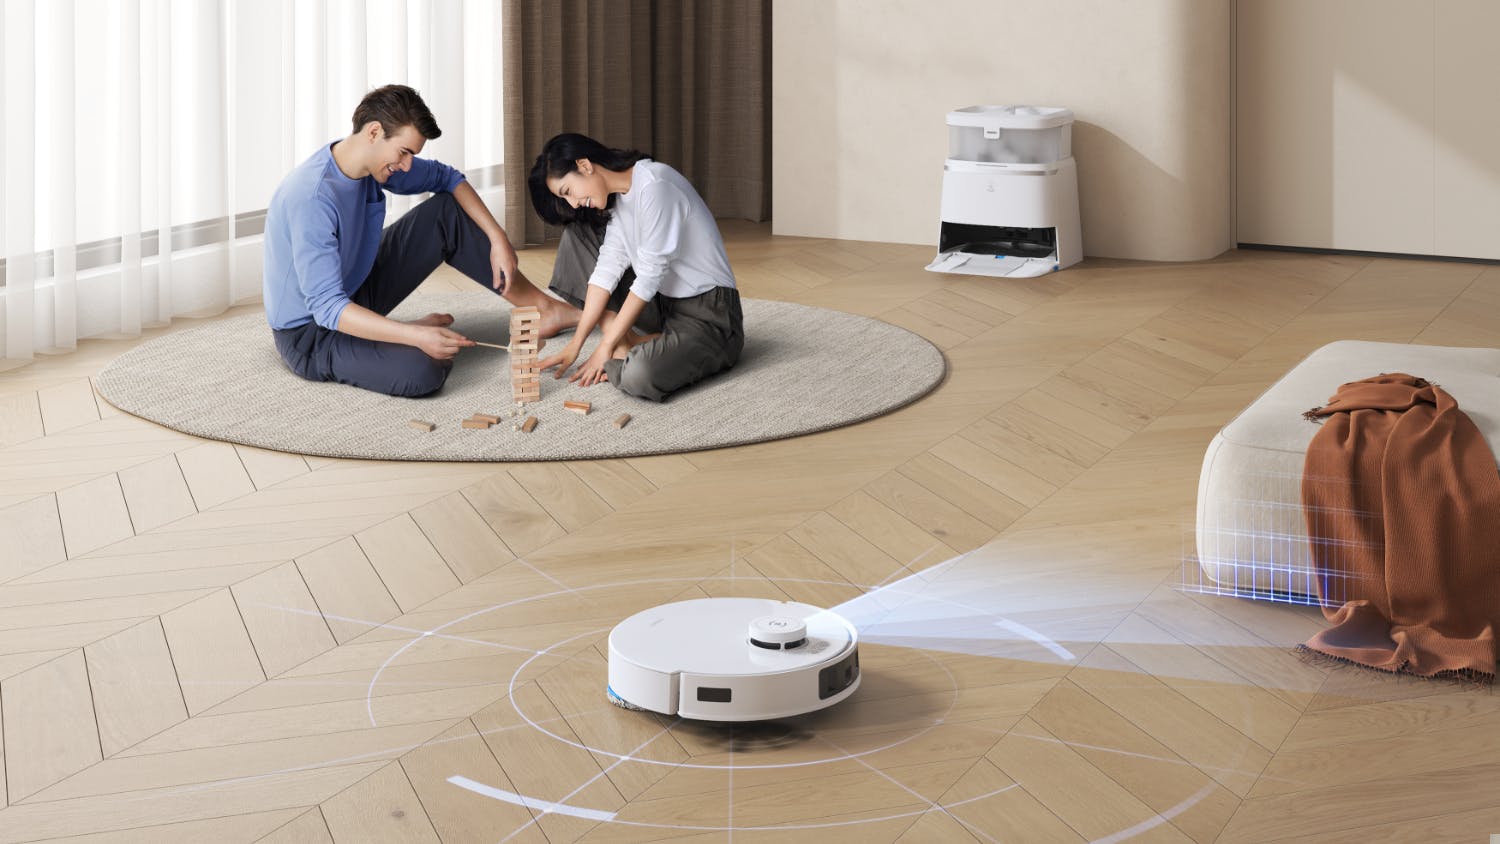 Ecovacs Deebot T30 Pro Omni Vacuum Cleaning Robot and Mop - White (DDX14)